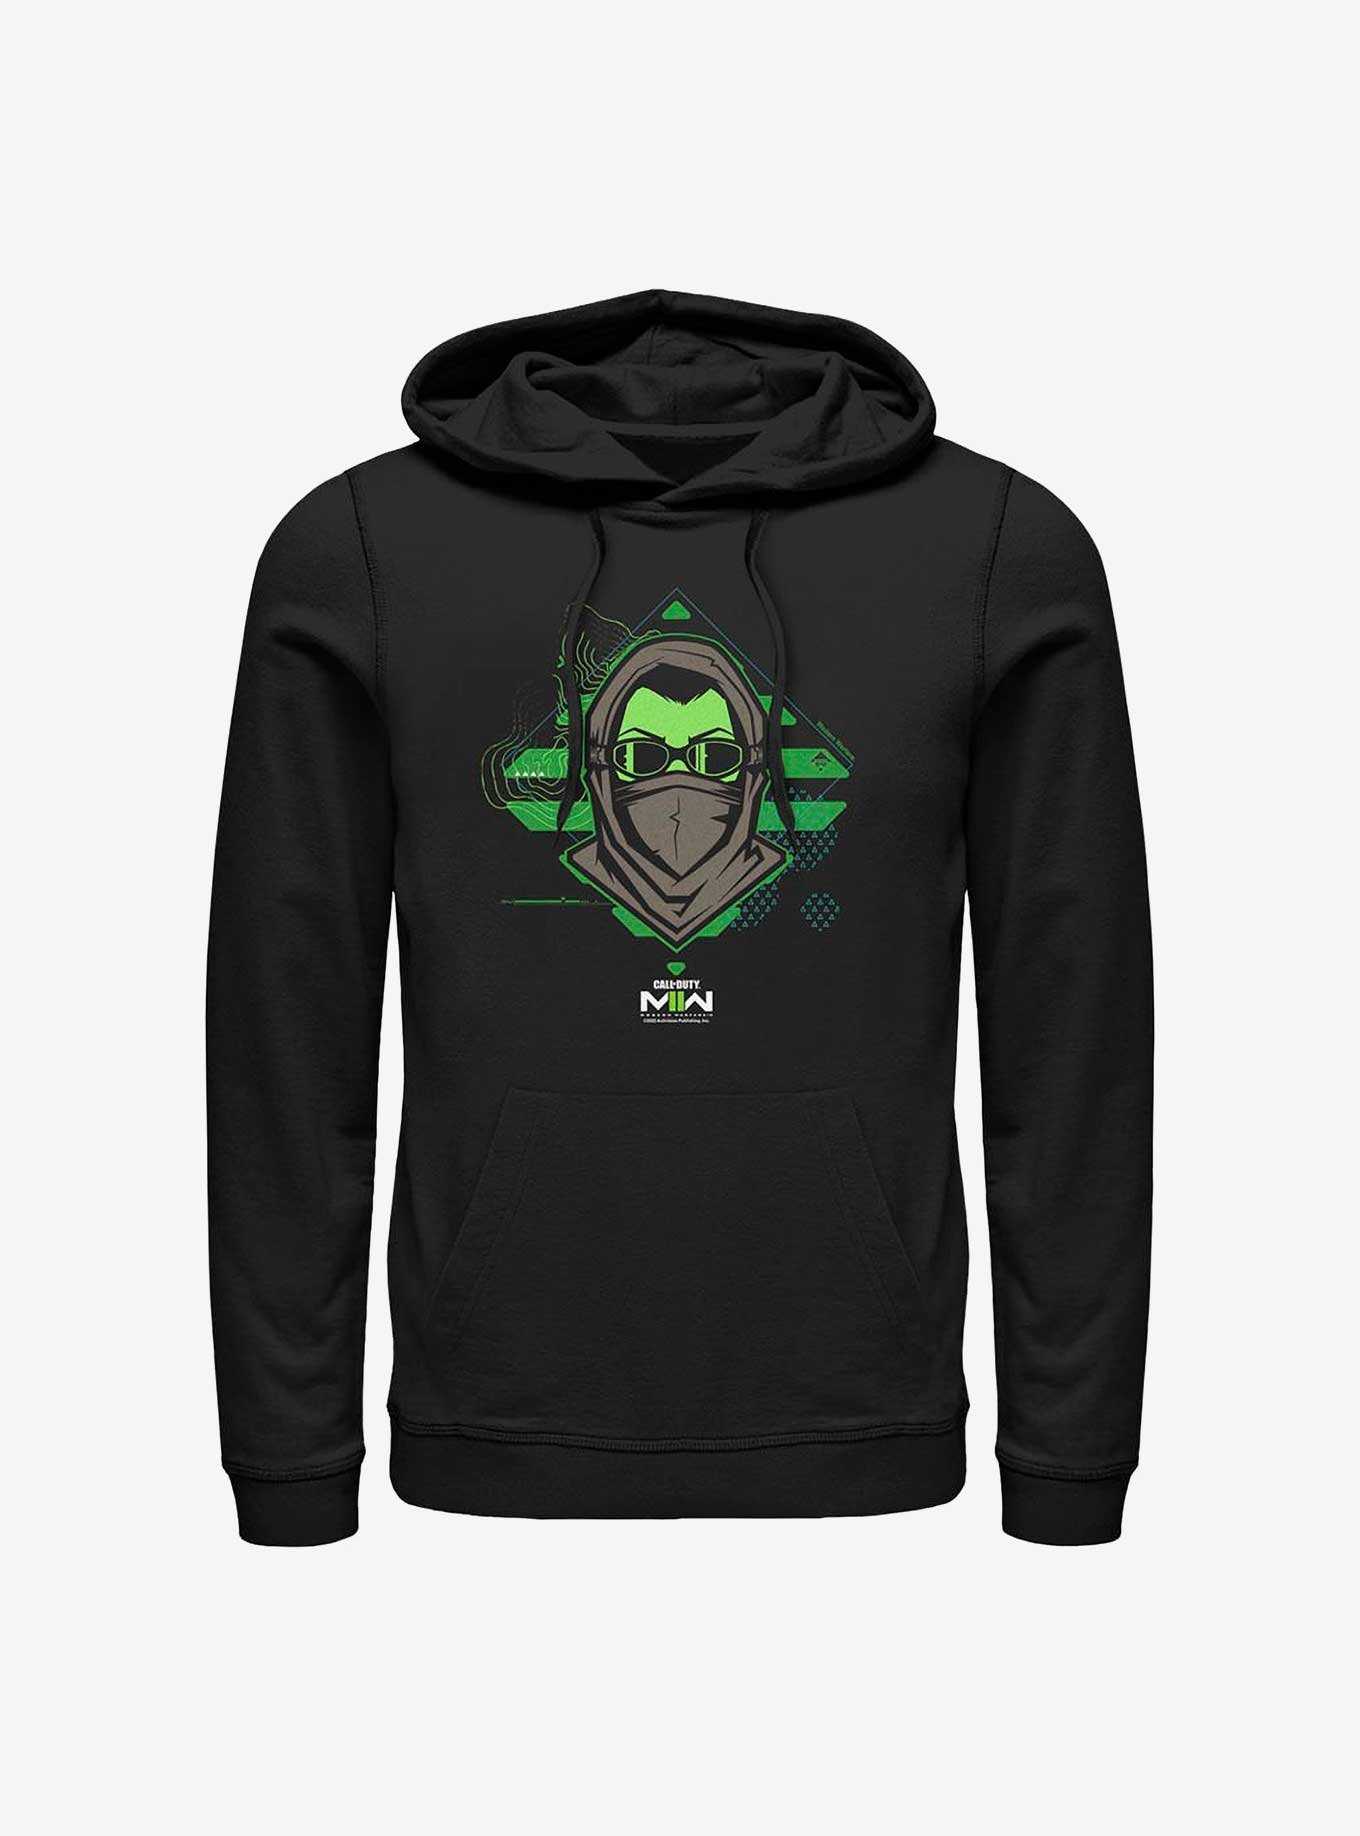 Call Of Duty Stealth Sniper Hoodie, , hi-res